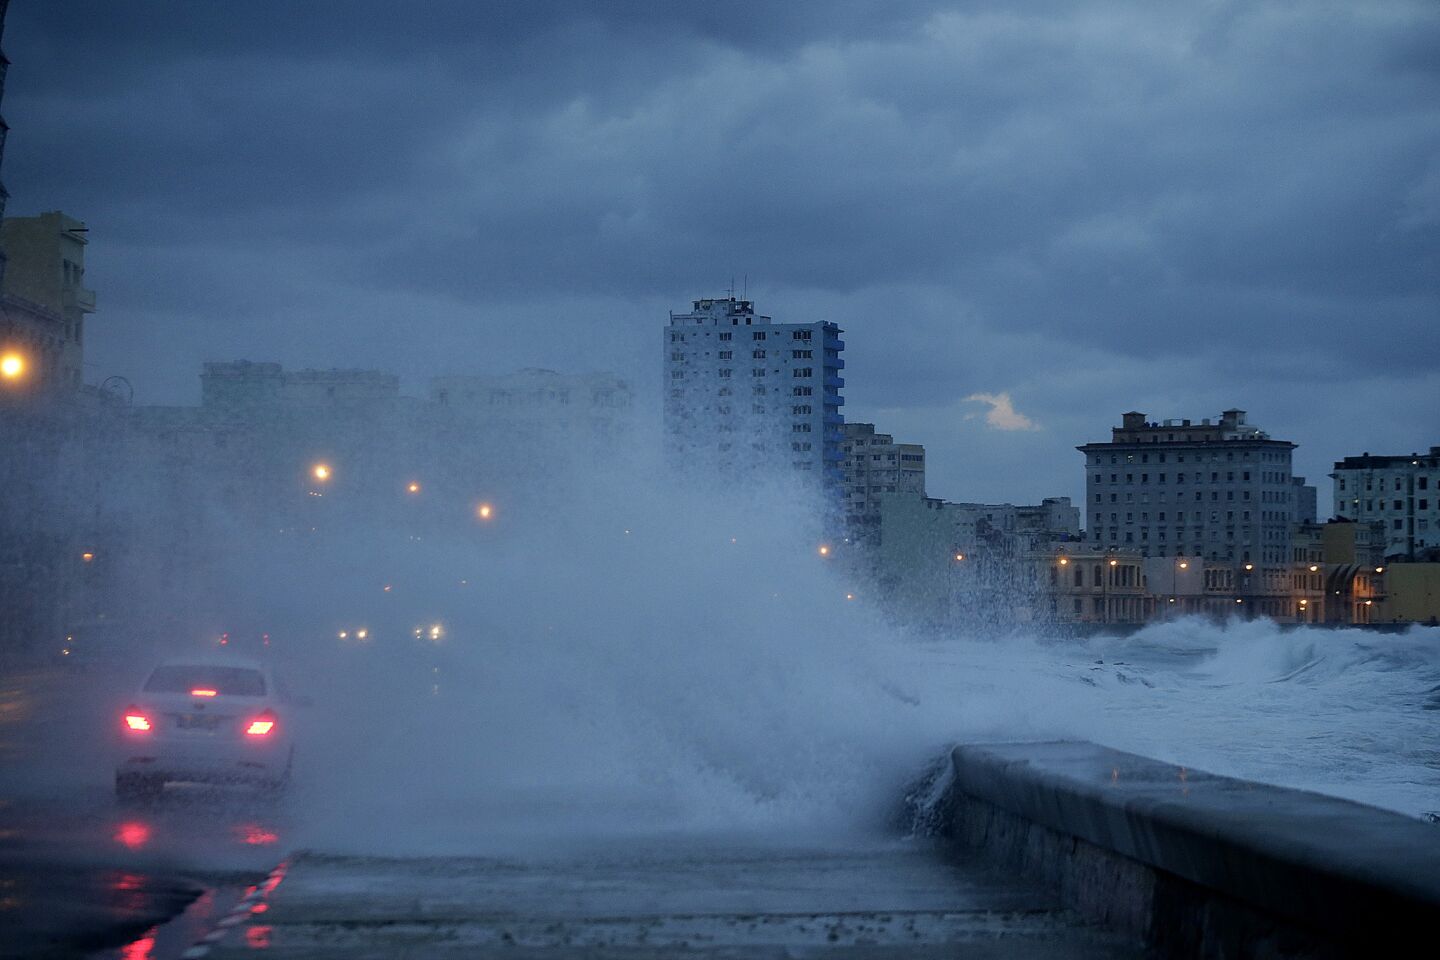 Waves crash well beyond the seawall along Havana's Malecon as a storm hangs over Cuba for a second straight day.